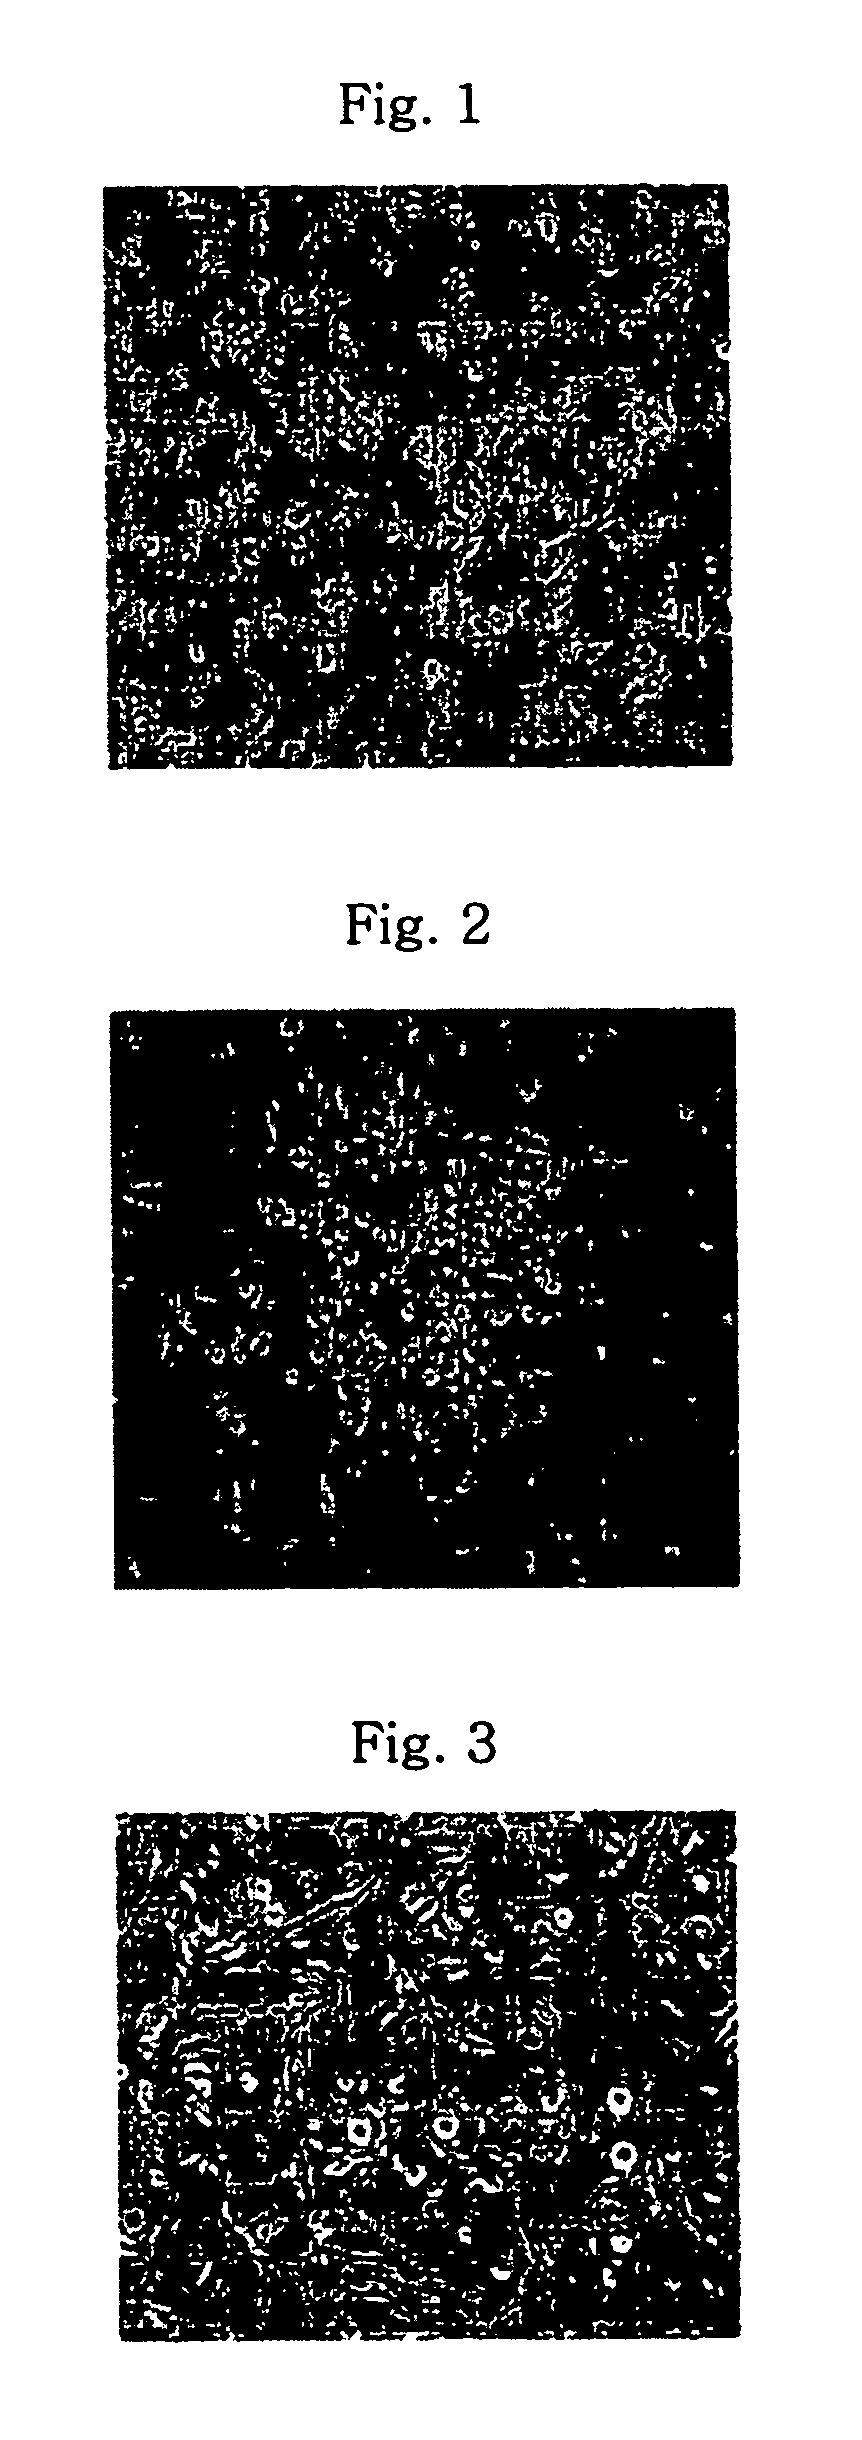 Method of isolating and culturing mesenchymal stem cell derived from umbilical cord blood